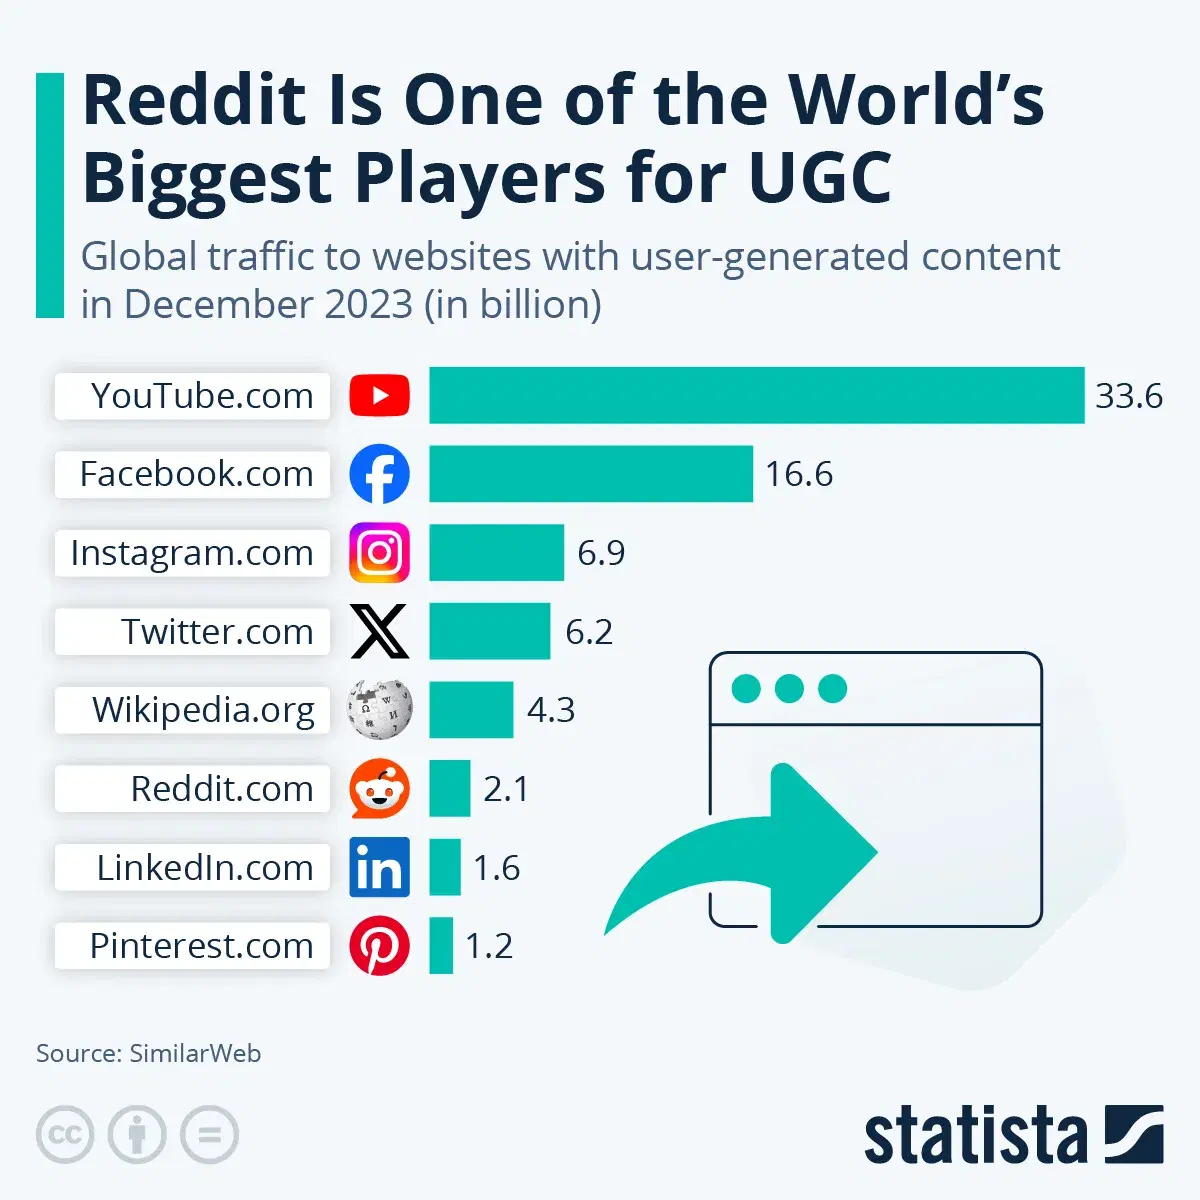 Reddit Is One of the World’s Biggest Players for User Generated Content